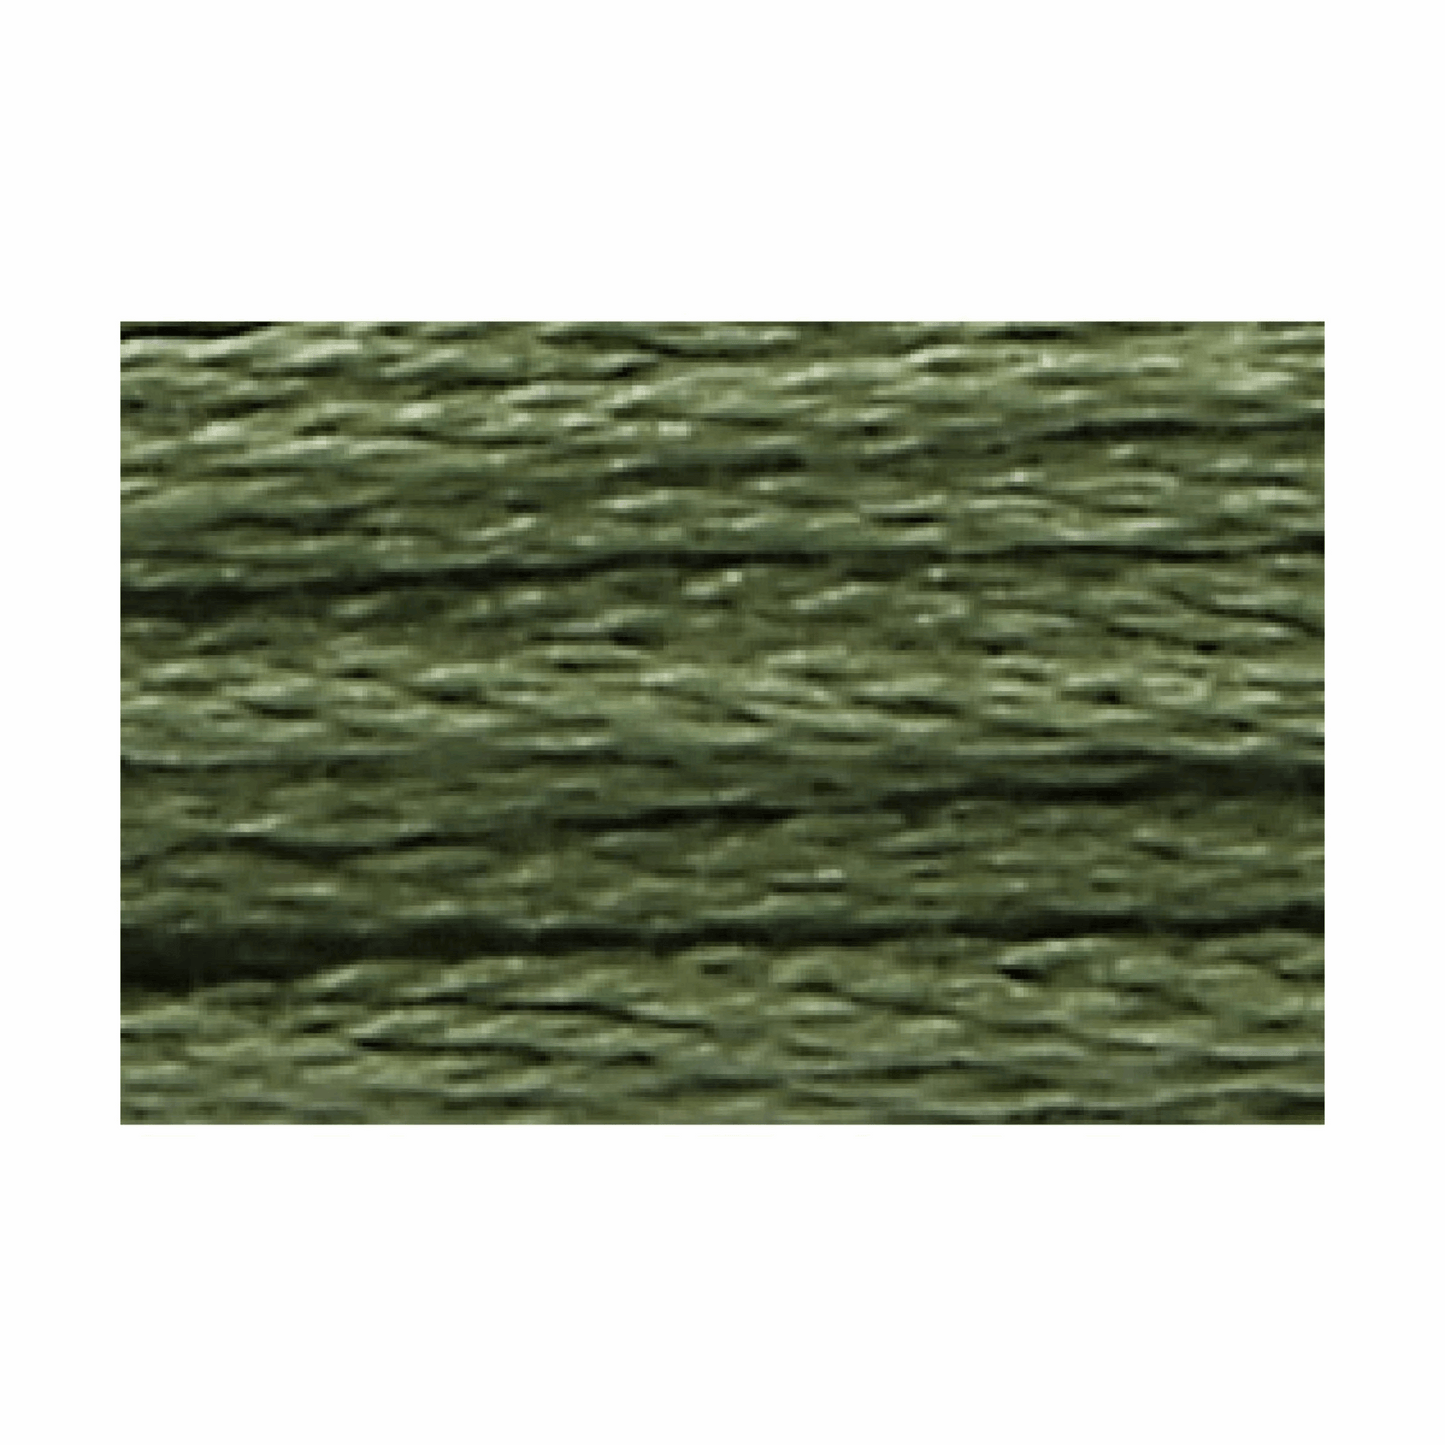 Anchor matt embroidery thread 10 m, 5 times lightly twisted, color olive green 262